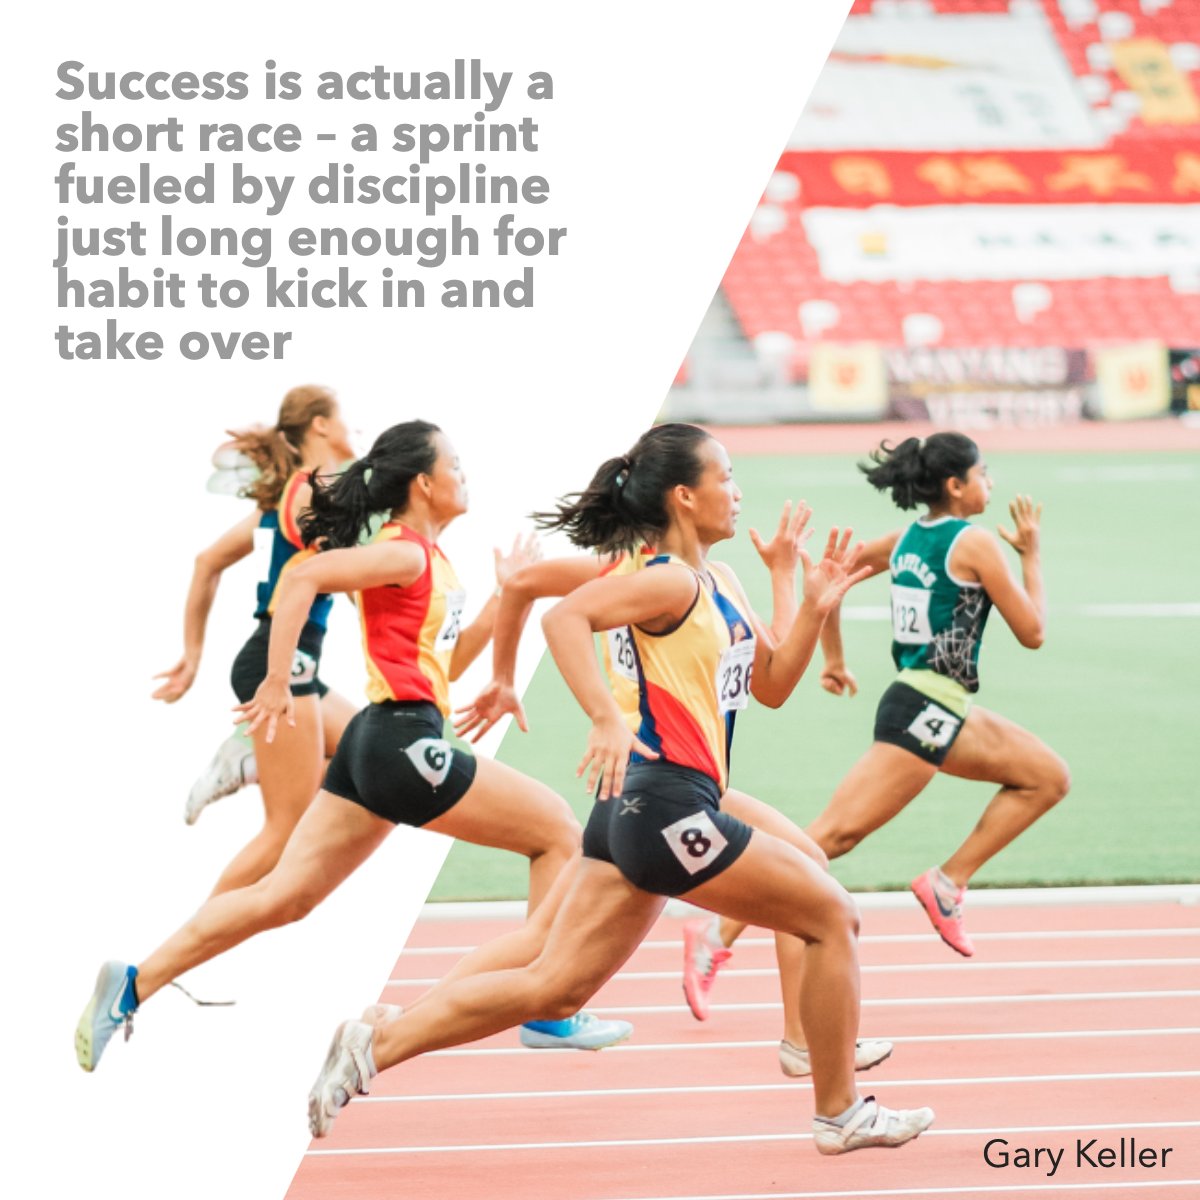 “Success is actually a short race - a sprint fueled by discipline just long enough for habit to kick in and take over.”
— Gary W. Keller

#Motivation #Inspirational #quoteoftheday✏️
 #YourPerfectHome #CRayBrower #SanJoaquinCounty #StocktonCA #RealEstate